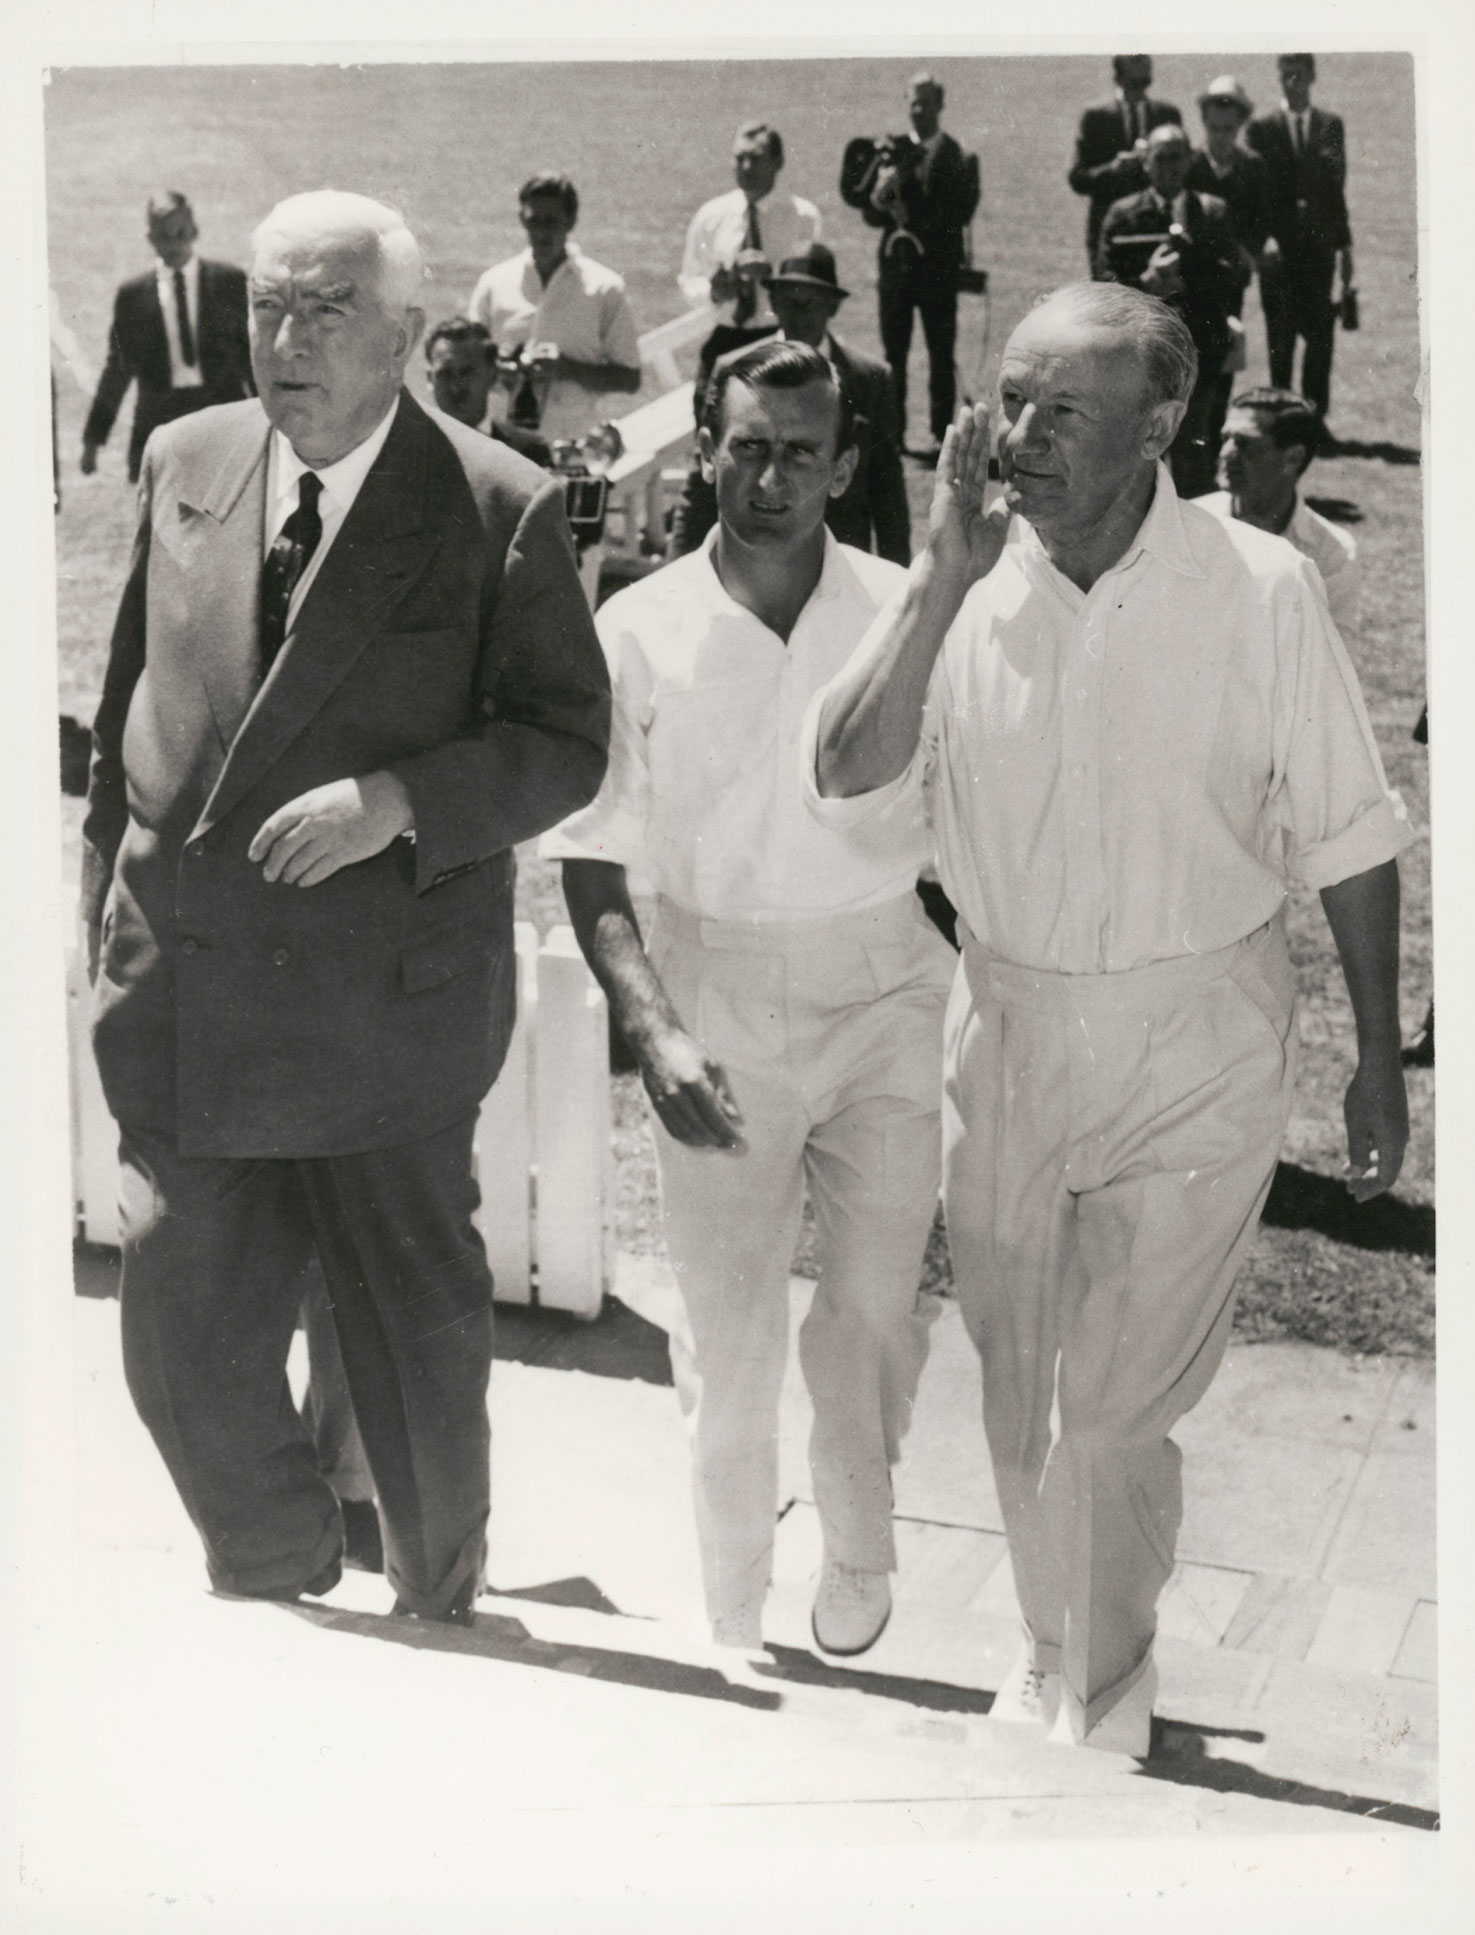 <p>Sir Robert Menzies (left) with cricketers Ted Dexter and Don Bradman (right) at Manuka Oval, Canberra, 1963</p>
